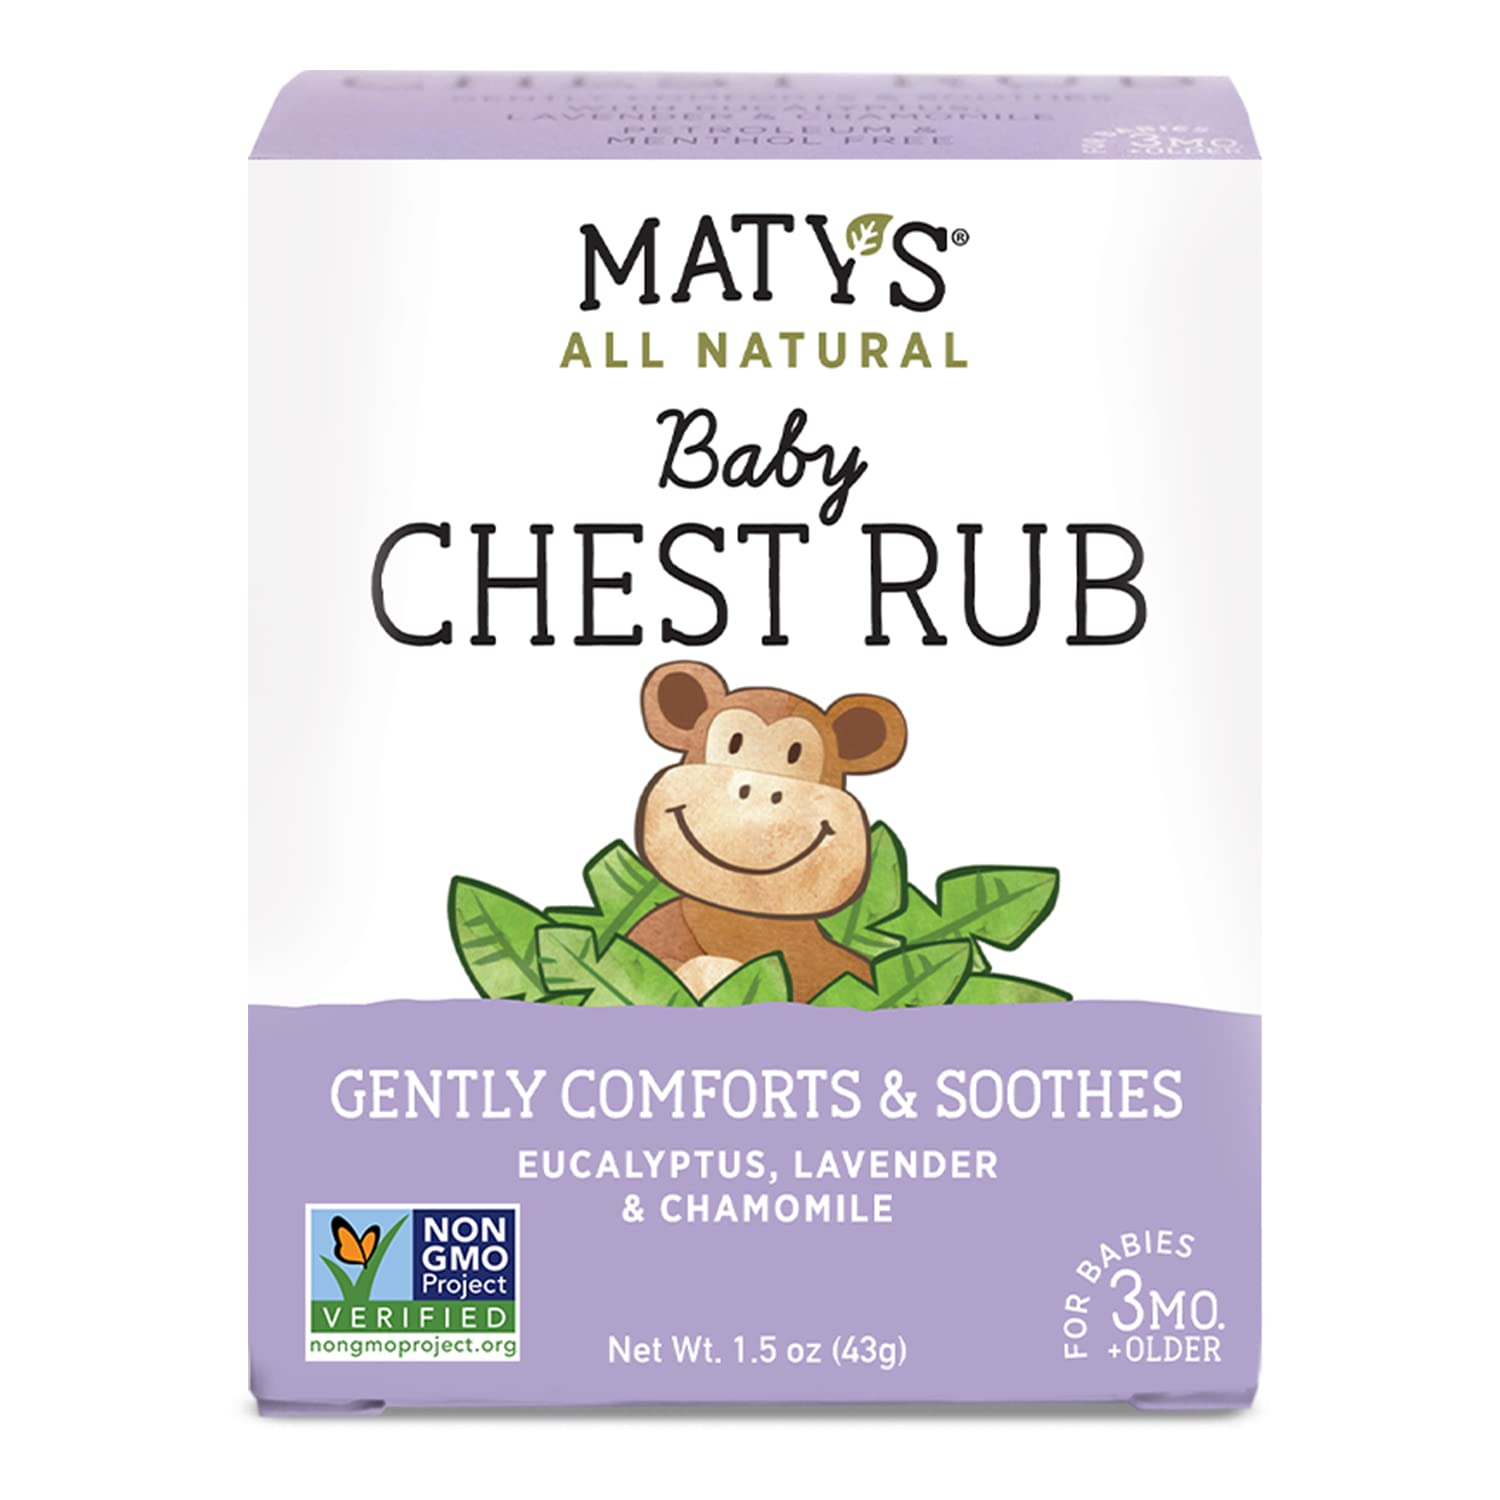 Maty's Baby Chest Rub - Naturally Comfort, Soothe and Help Relieve Congestion in Babies 3 months+, Petroleum Free - Made with Soothing Lavender and Chamomile - 1.5 oz